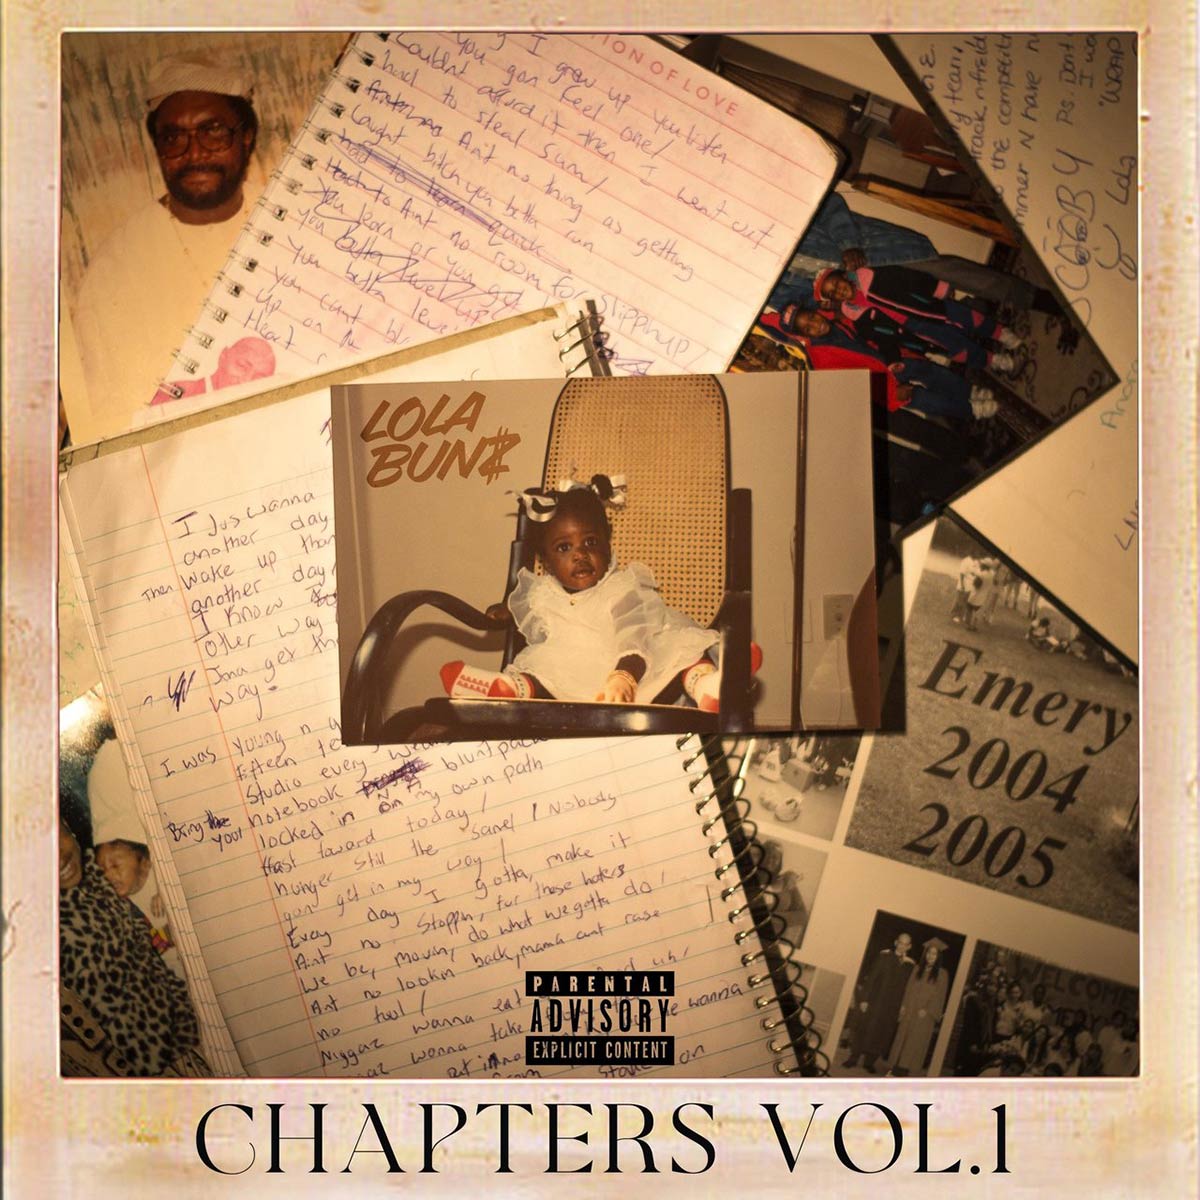 Artwork for Chapters Vol. 1 by LolaBunz